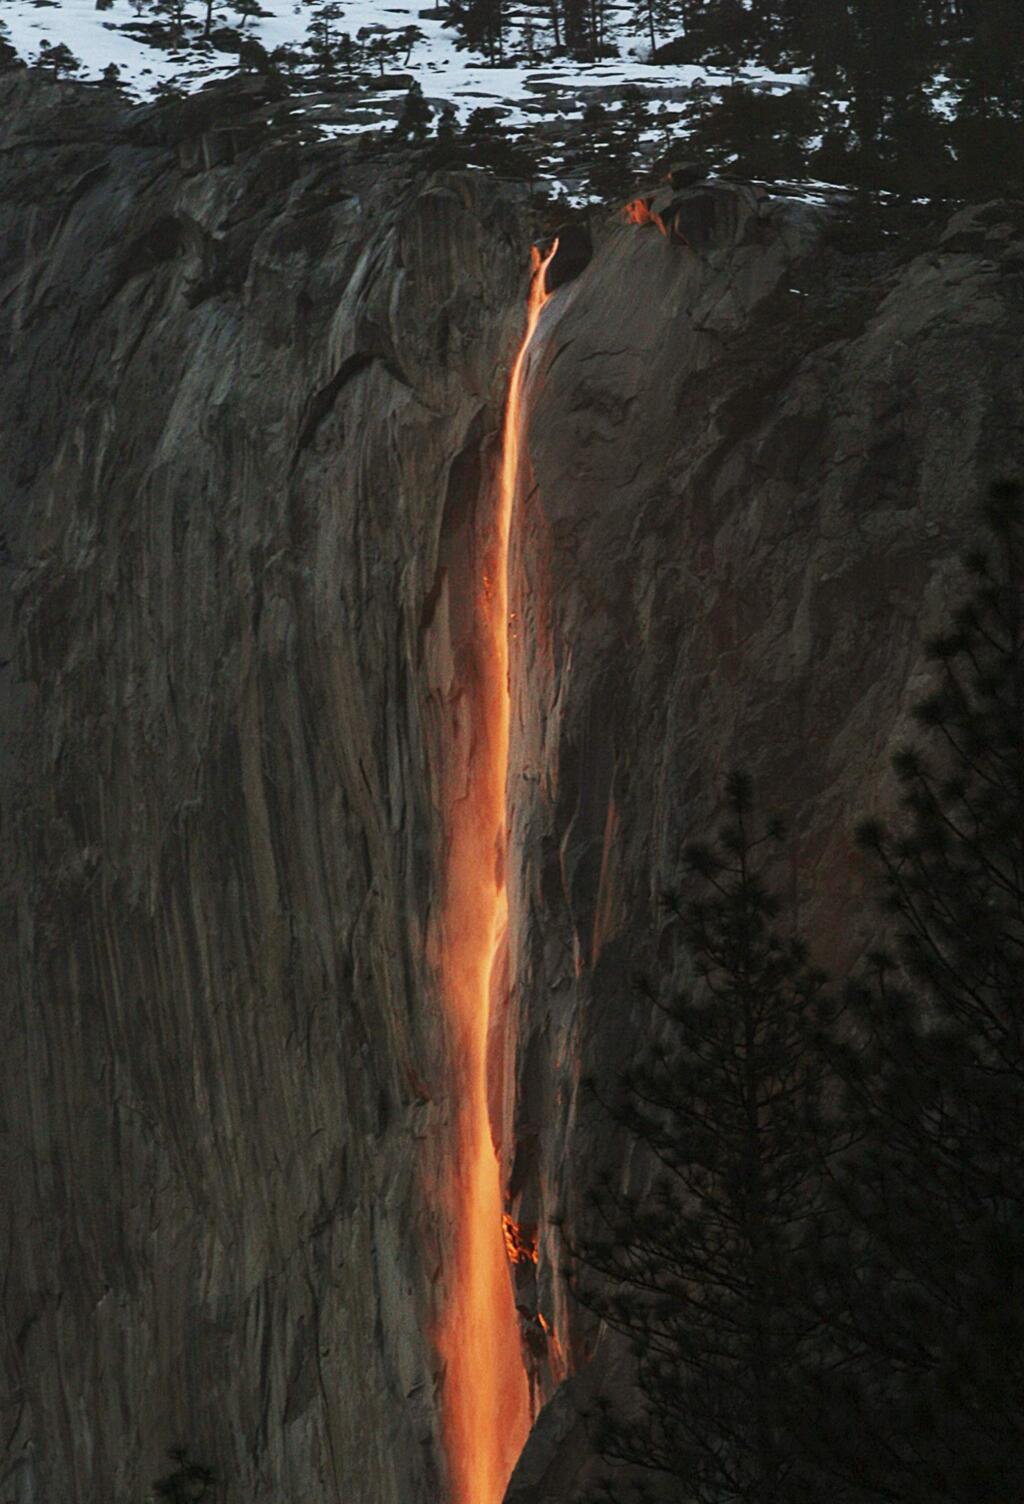 FILE - In this Feb. 16, 2010, file photo, a shaft of sunlight creates a glow near Horsetail Fall, in Yosemite National Park, Calif. Adventurers hoping to see Yosemite National Park's annual 'firefall' will need reservations. At least 50 permits will be issued for each day between Feb. 12 and Feb. 26. The annual event is known to attract over 1,000 sightseers a year. (Eric Paul Zamora/The Fresno Bee via AP, File)